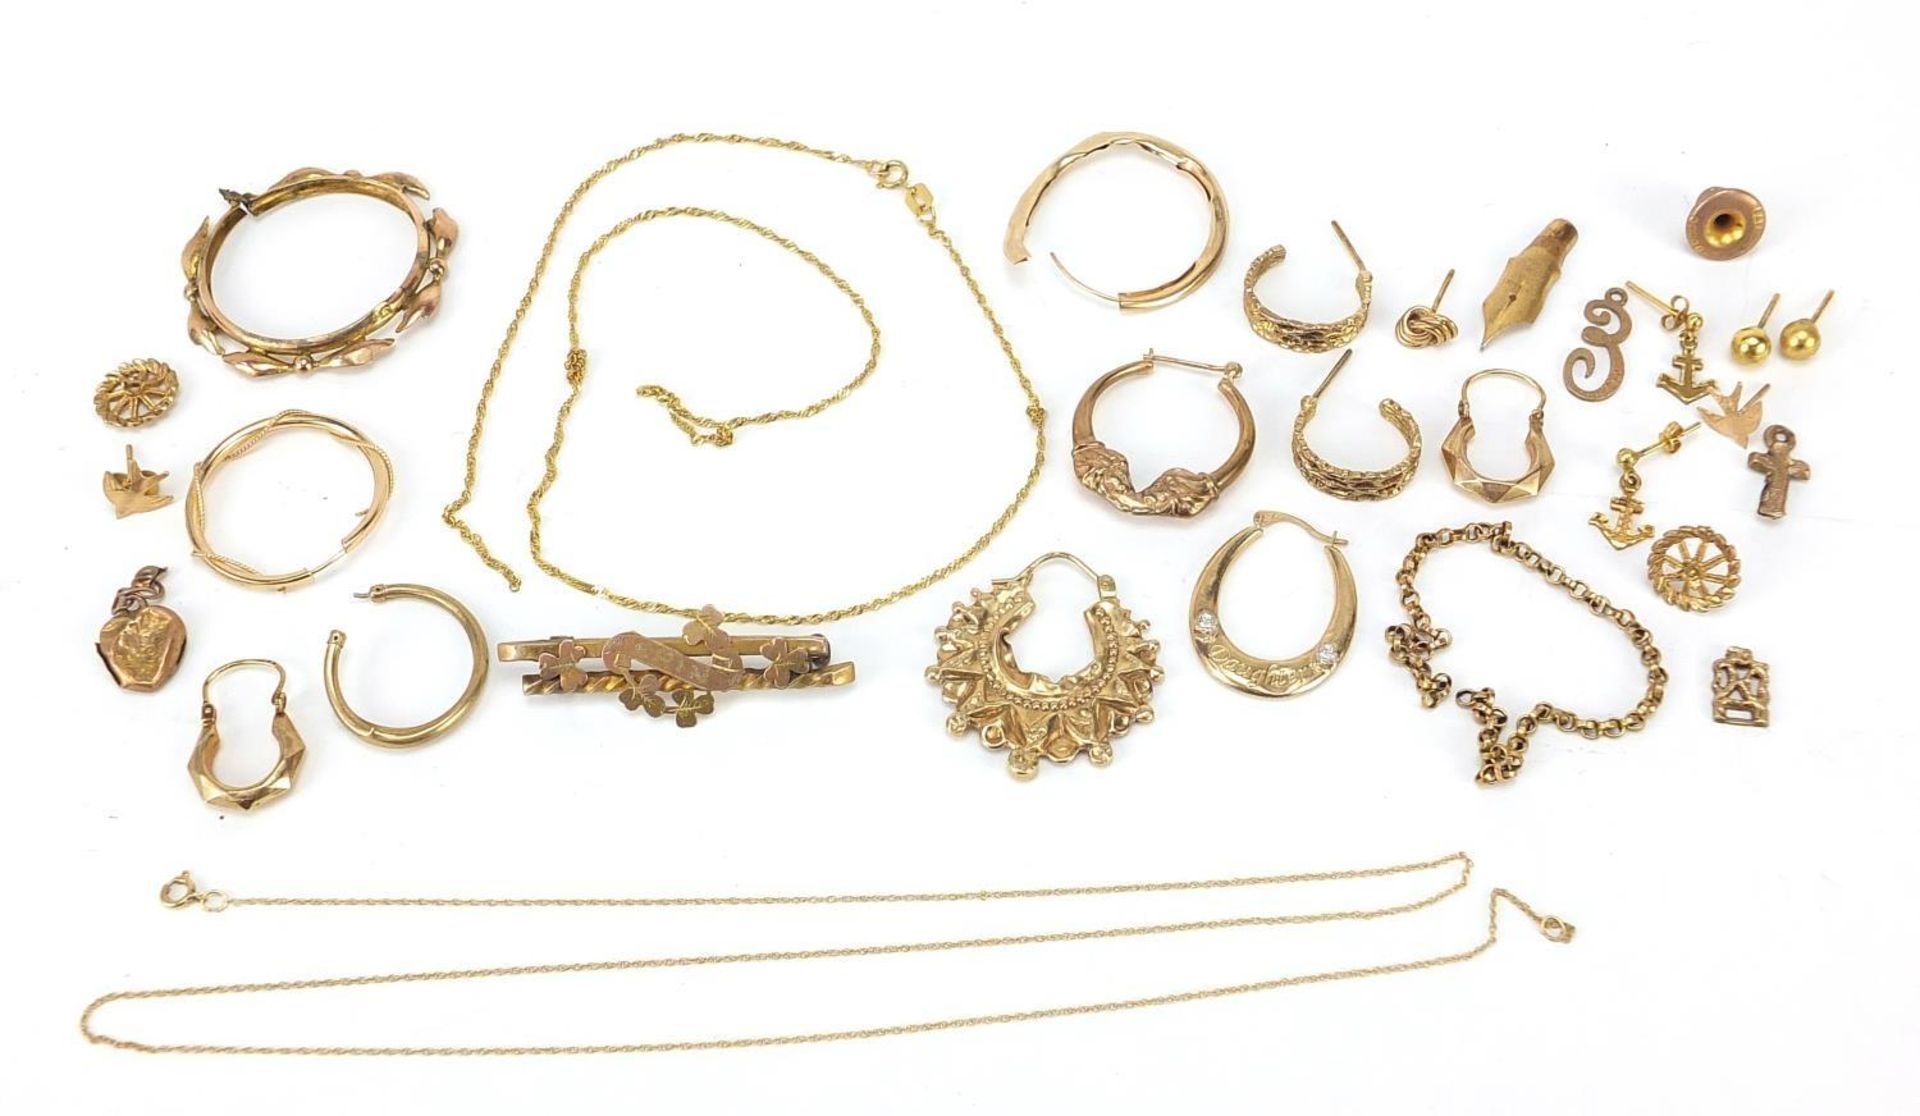 9ct gold jewellery including earrings, necklaces, Victorian bar brooch and 14ct gold fountain pen